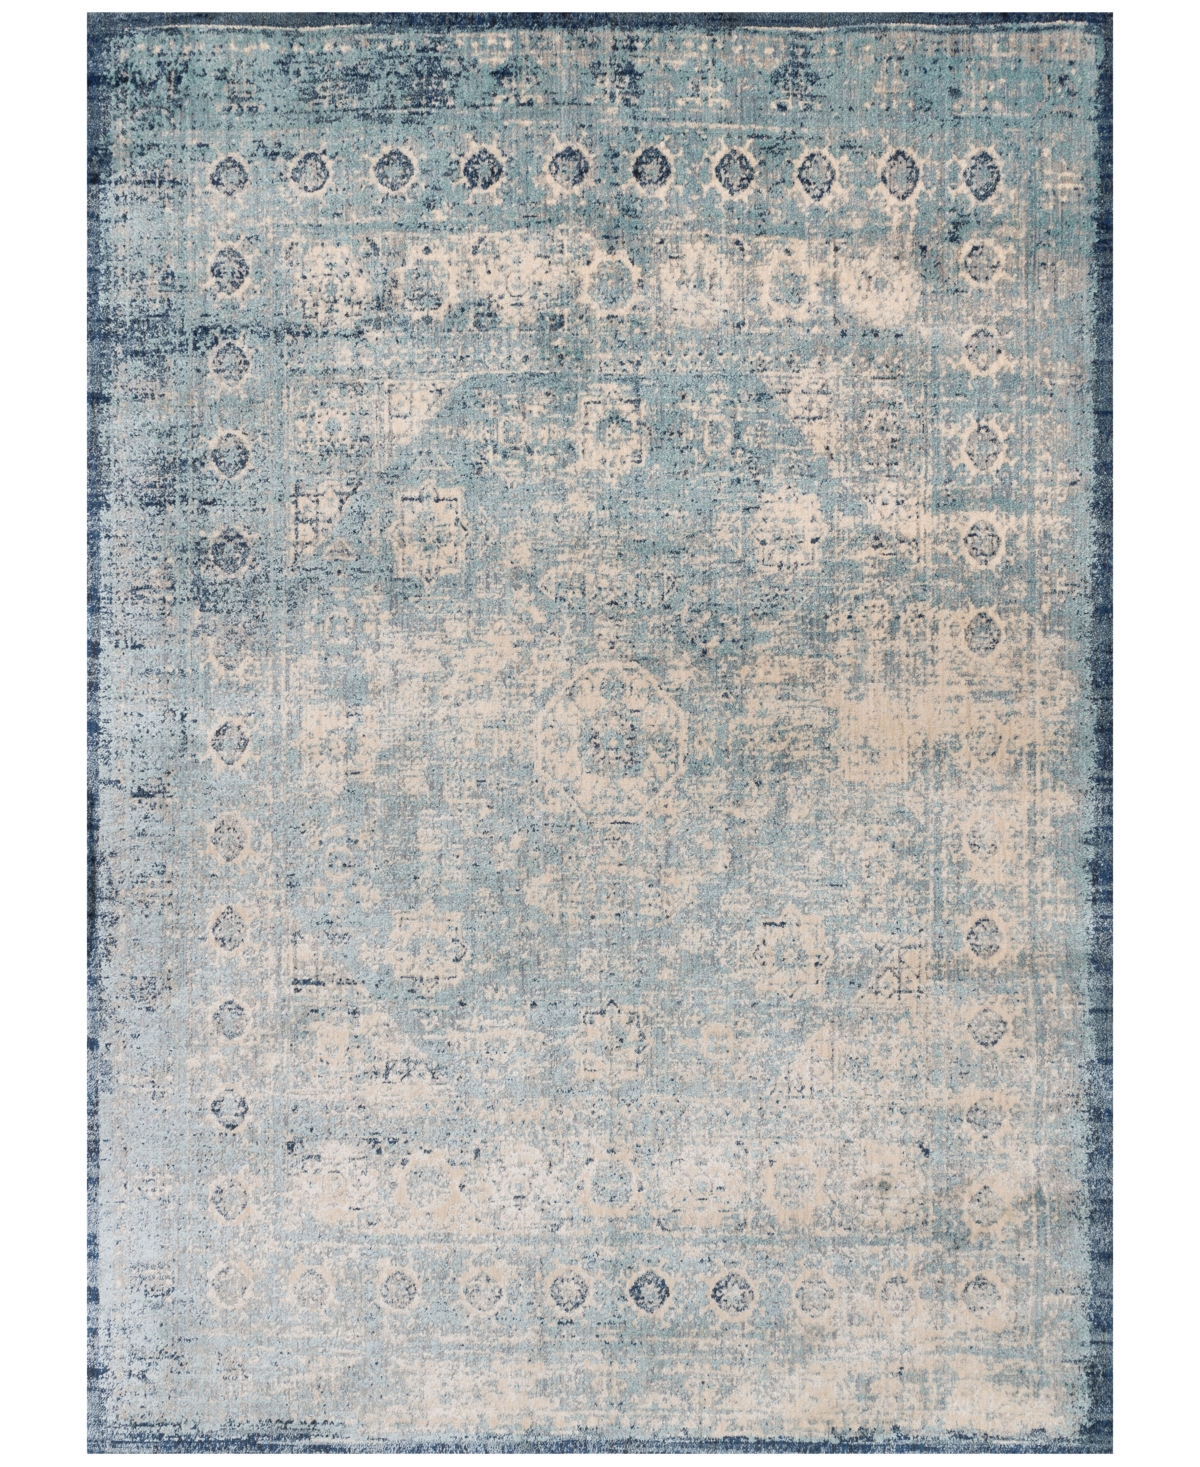 Loloi Anastasia Af-14 6'7in x 9'2in Area Rugs - Light Blue/Ivory